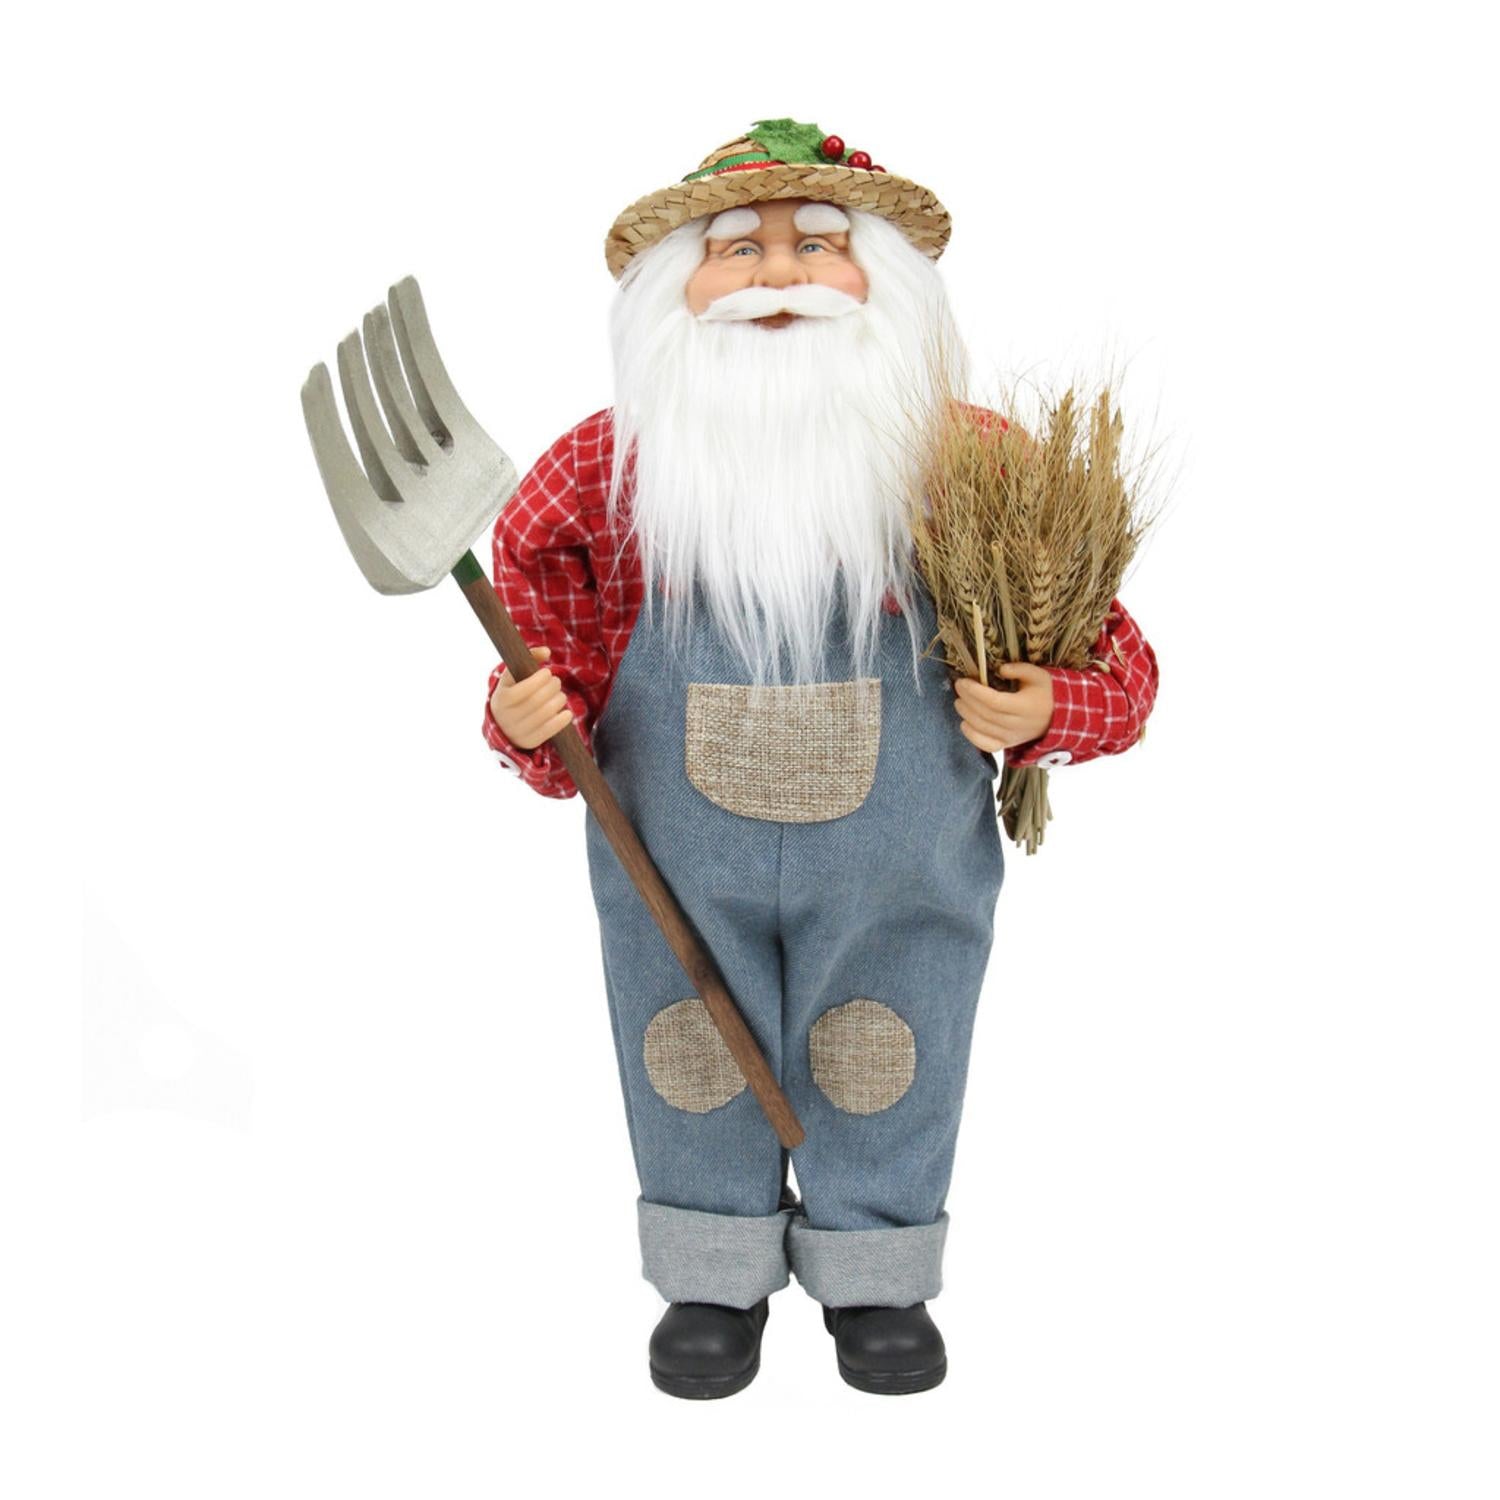 18" Country Heritage Santa Claus Holding a Sheaf of Wheat Christmas Decoration